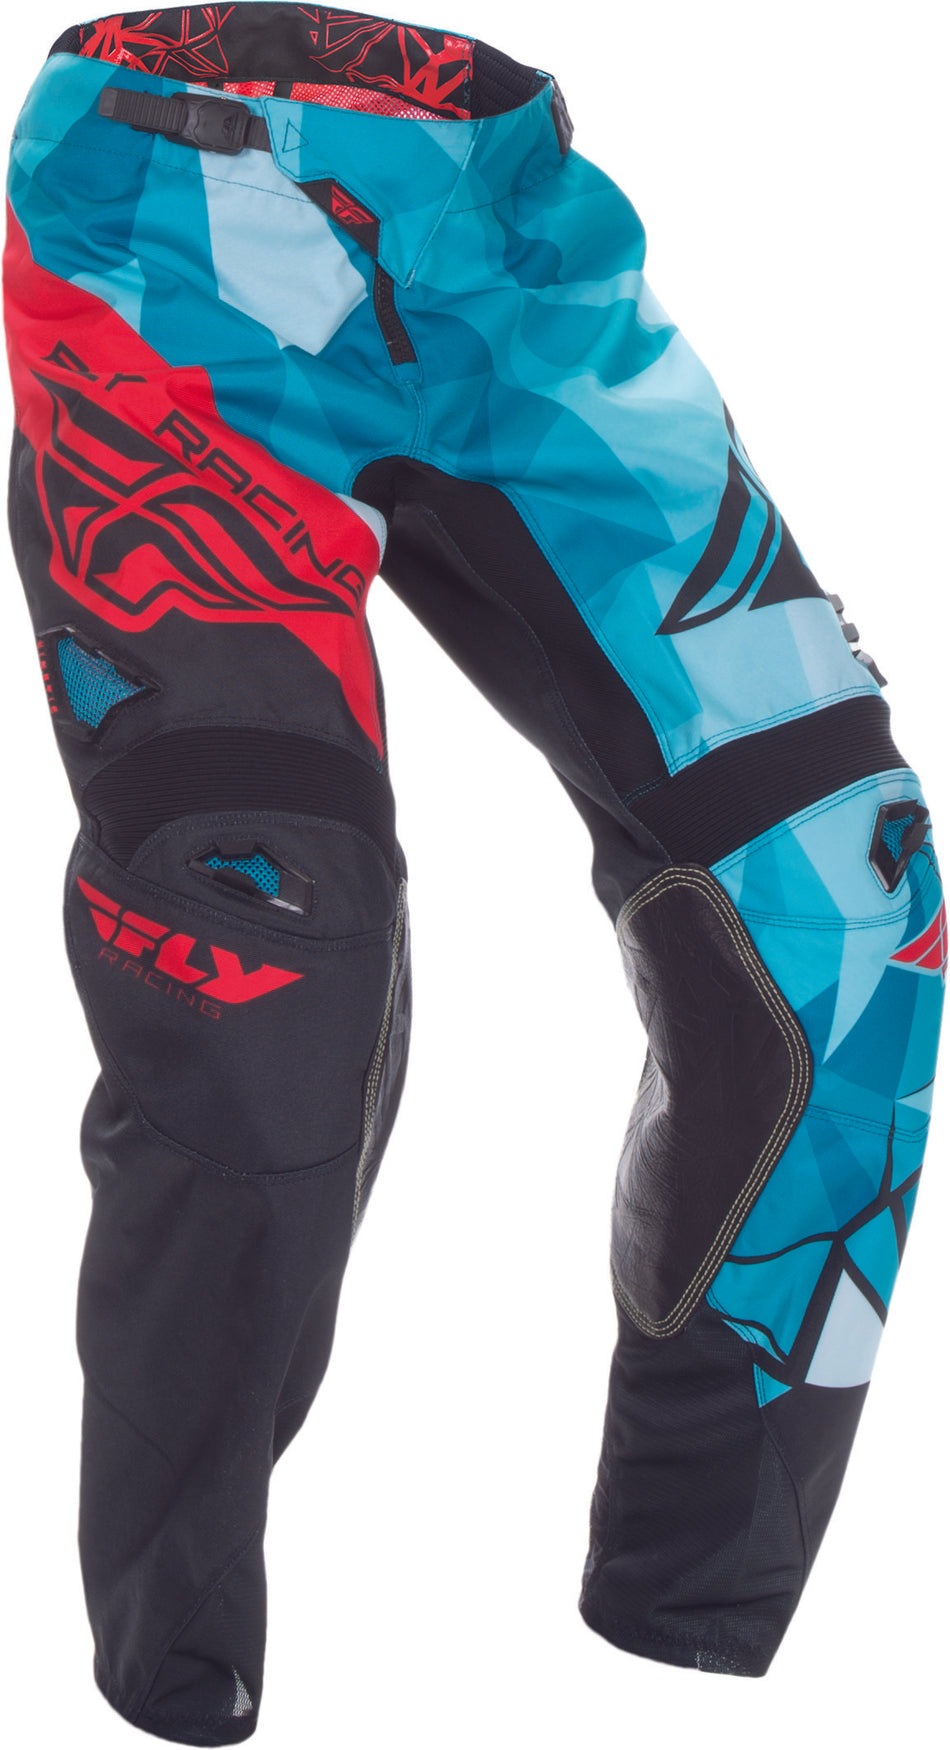 FLY RACING Kinetic Crux Pant Teal/Red Sz 20 370-53920